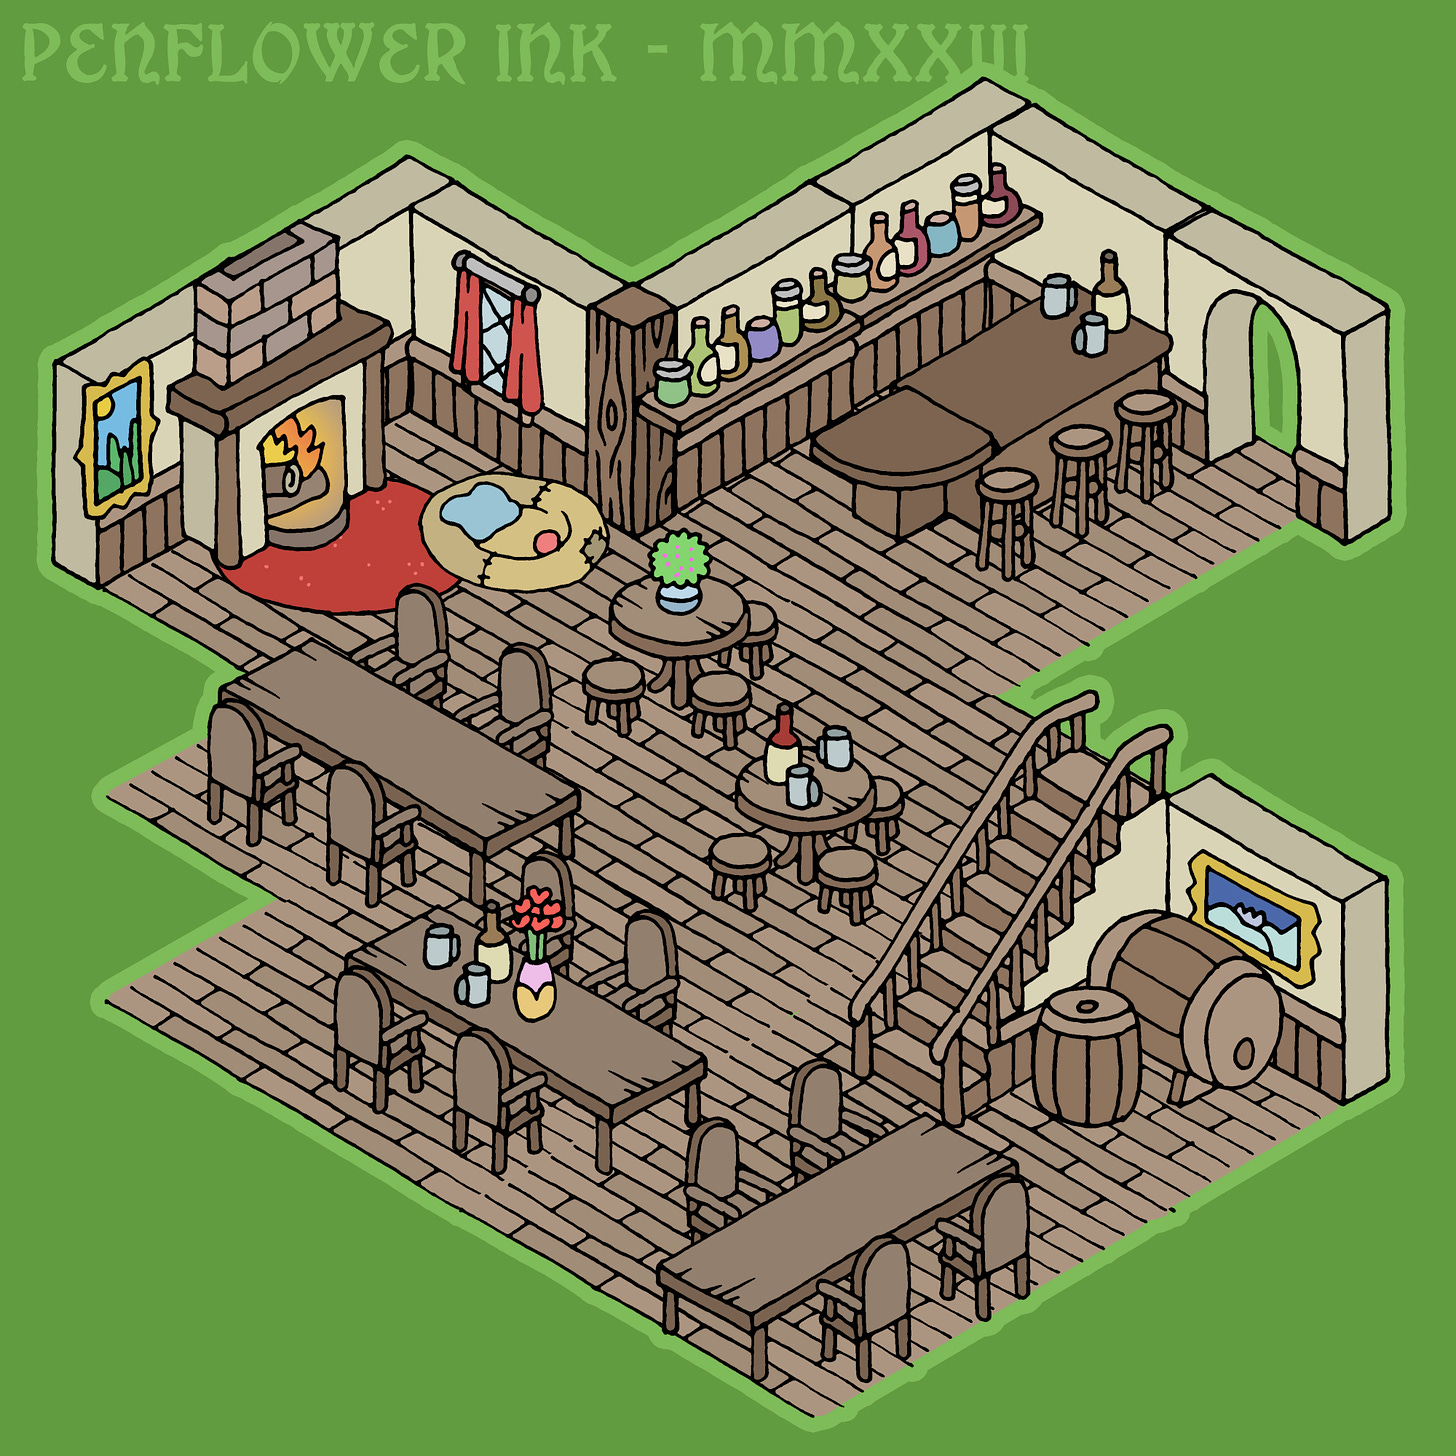 Composite image of an isometric fantasy tavern map, made using the various new modular tavern assets, including wall sections, wooden floors, furniture and decorative objects.